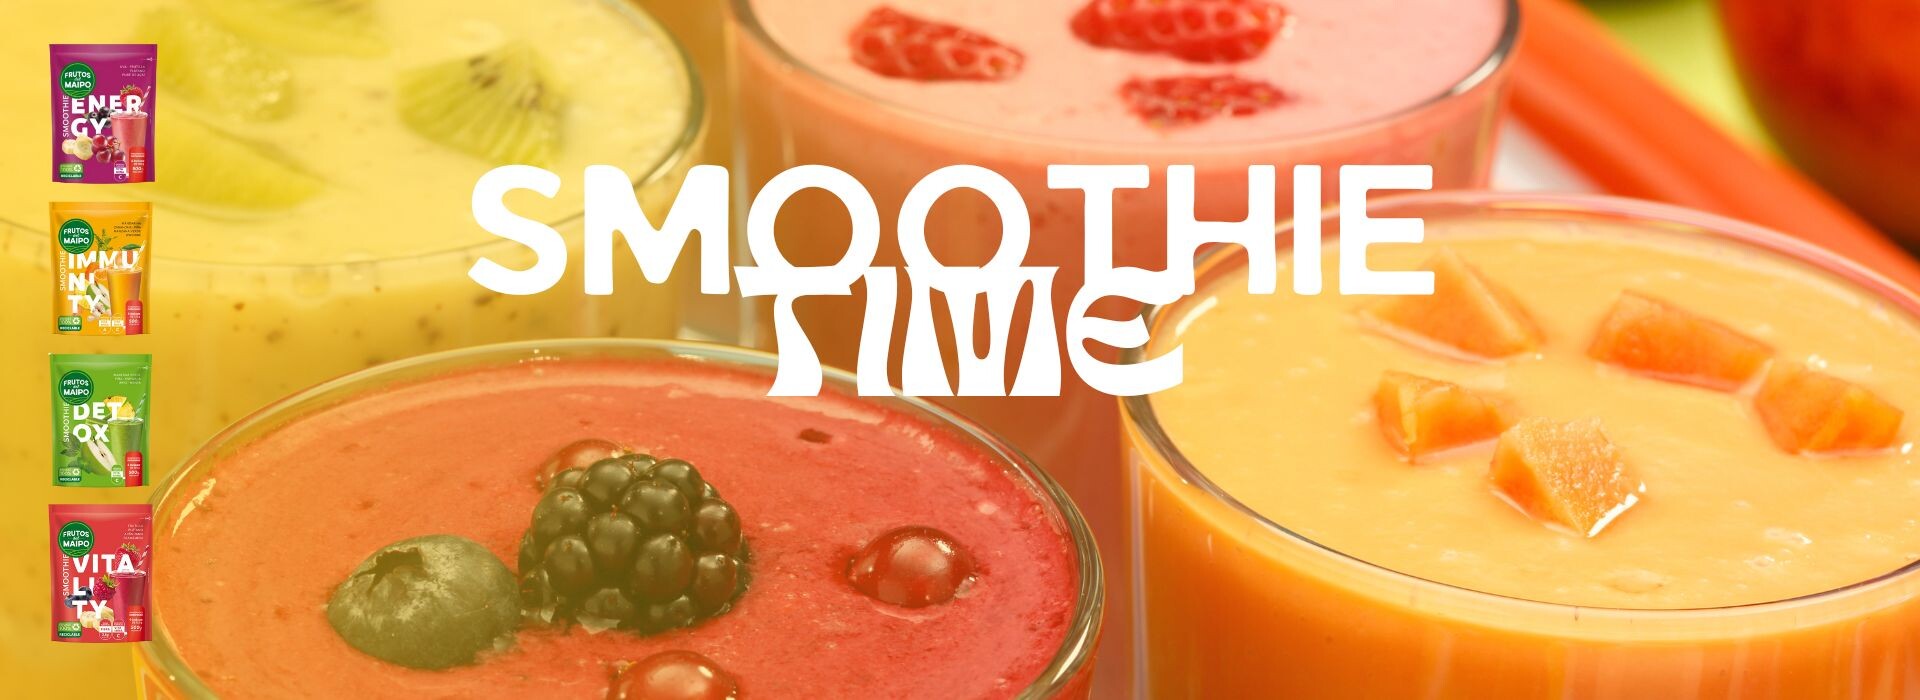 ¡SMOOTHIE TIME!